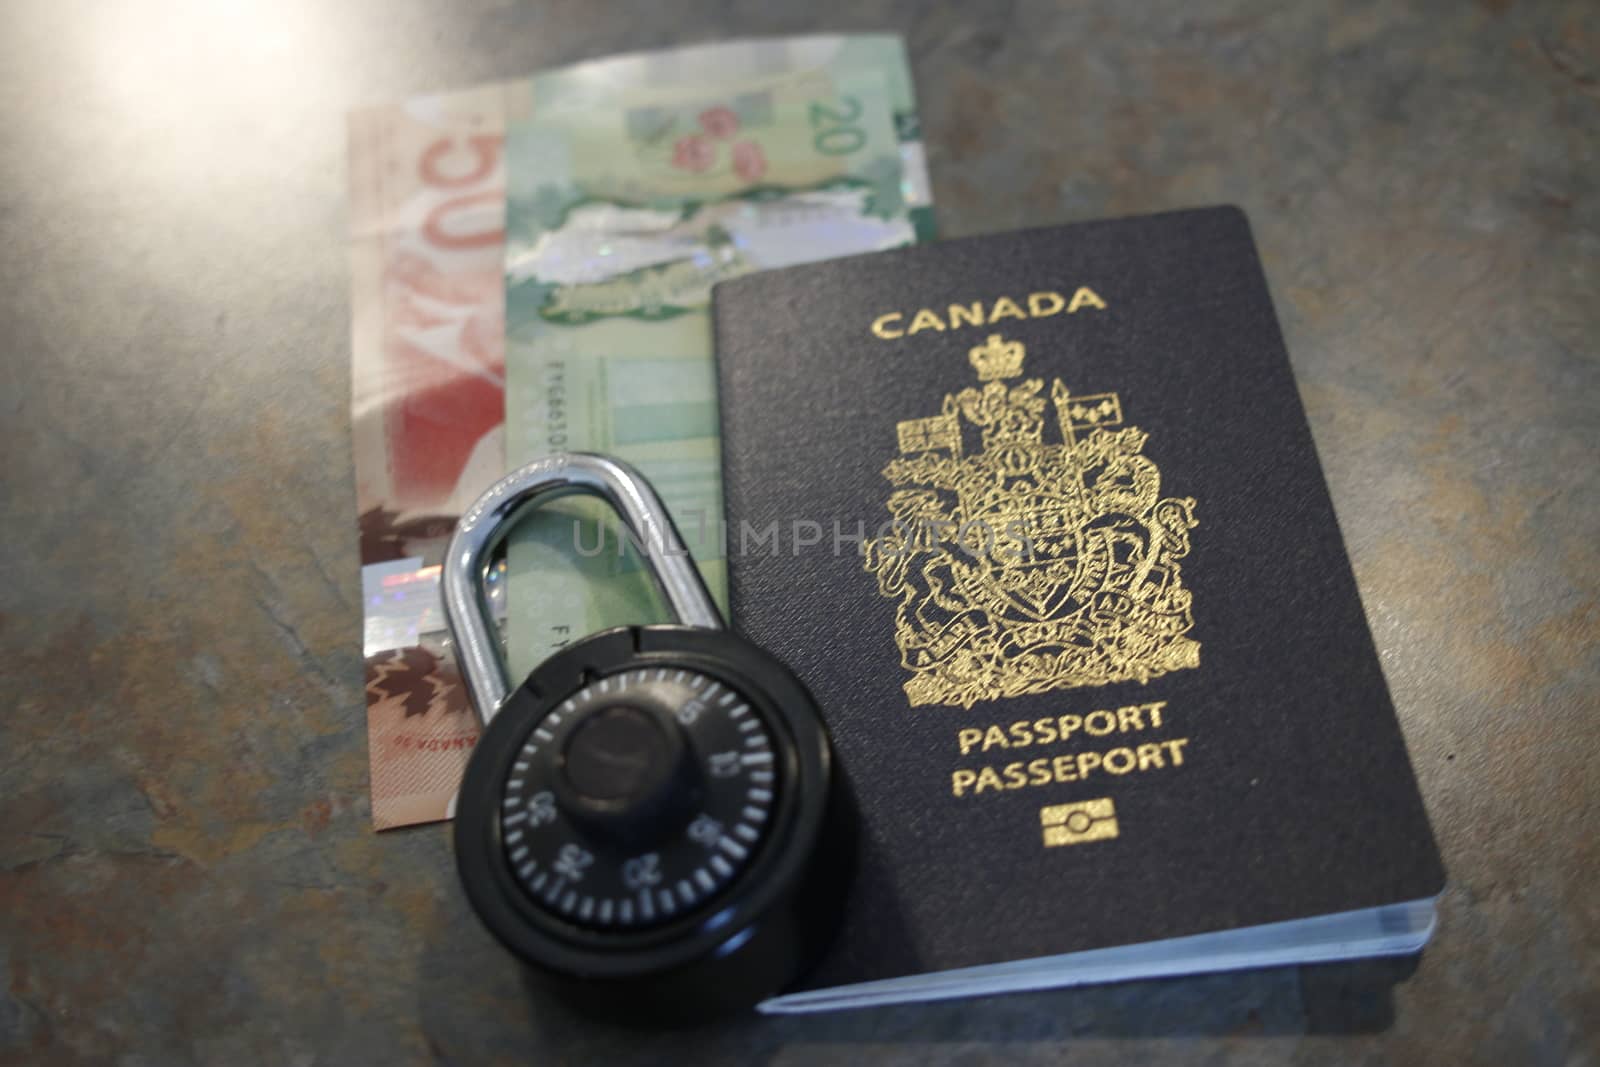 immigration canada themed photos. Either deportation or emigration can also work by mynewturtle1